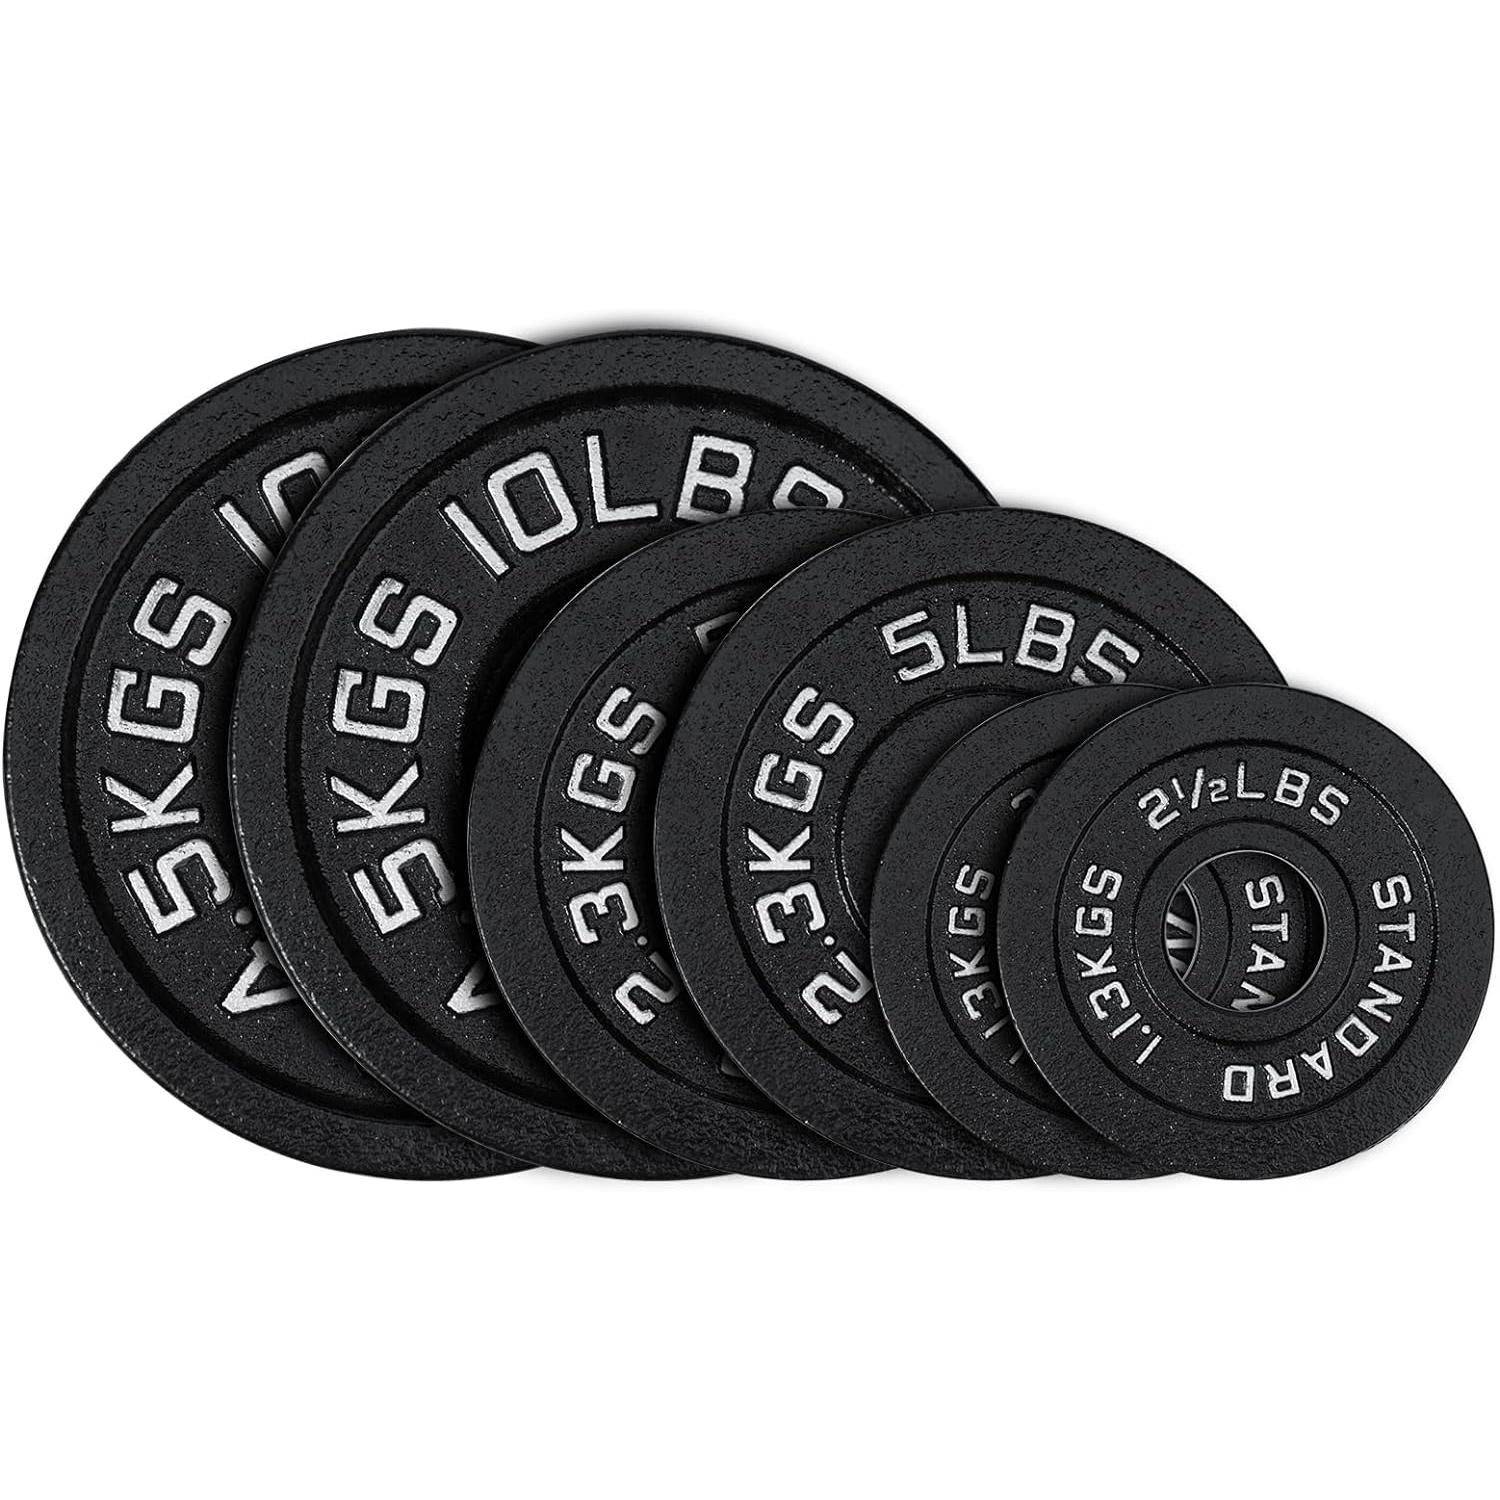 Cast Iron 2-Inch Plate Weight Set for Strength Training, Weightlifting and Crossfit Exercise & Fitness  